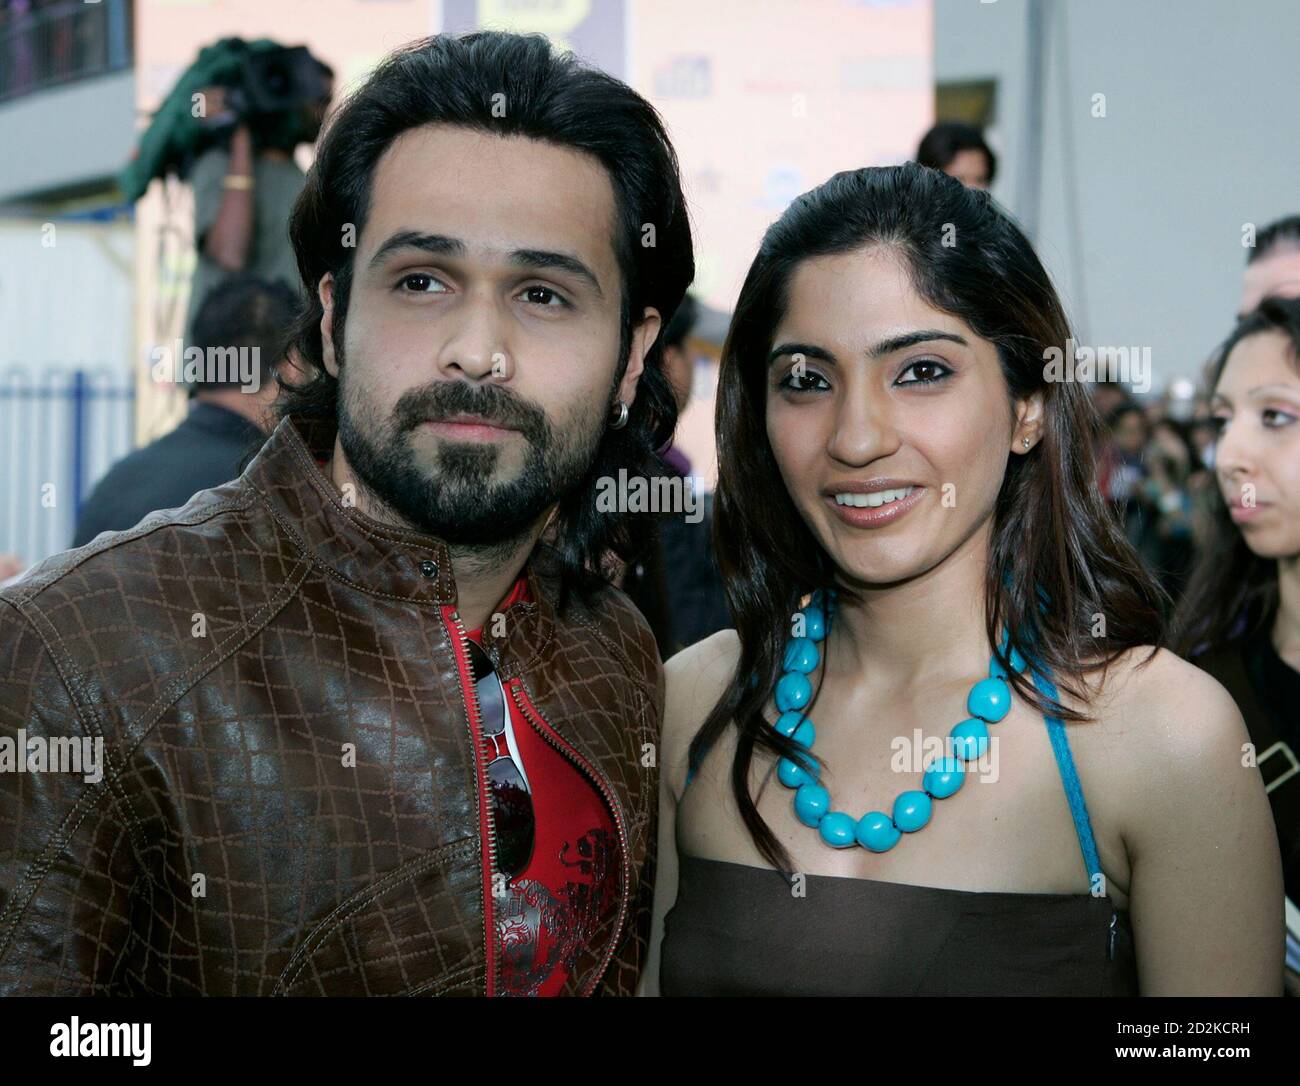 Bollywood actor Emraan Hashmi arrives with an unidentified guest for the  Indian International Academy Awards (IIFA) in Sheffield, northern England  June 9, 2007. REUTERS/David Moir (BRITAIN Stock Photo - Alamy